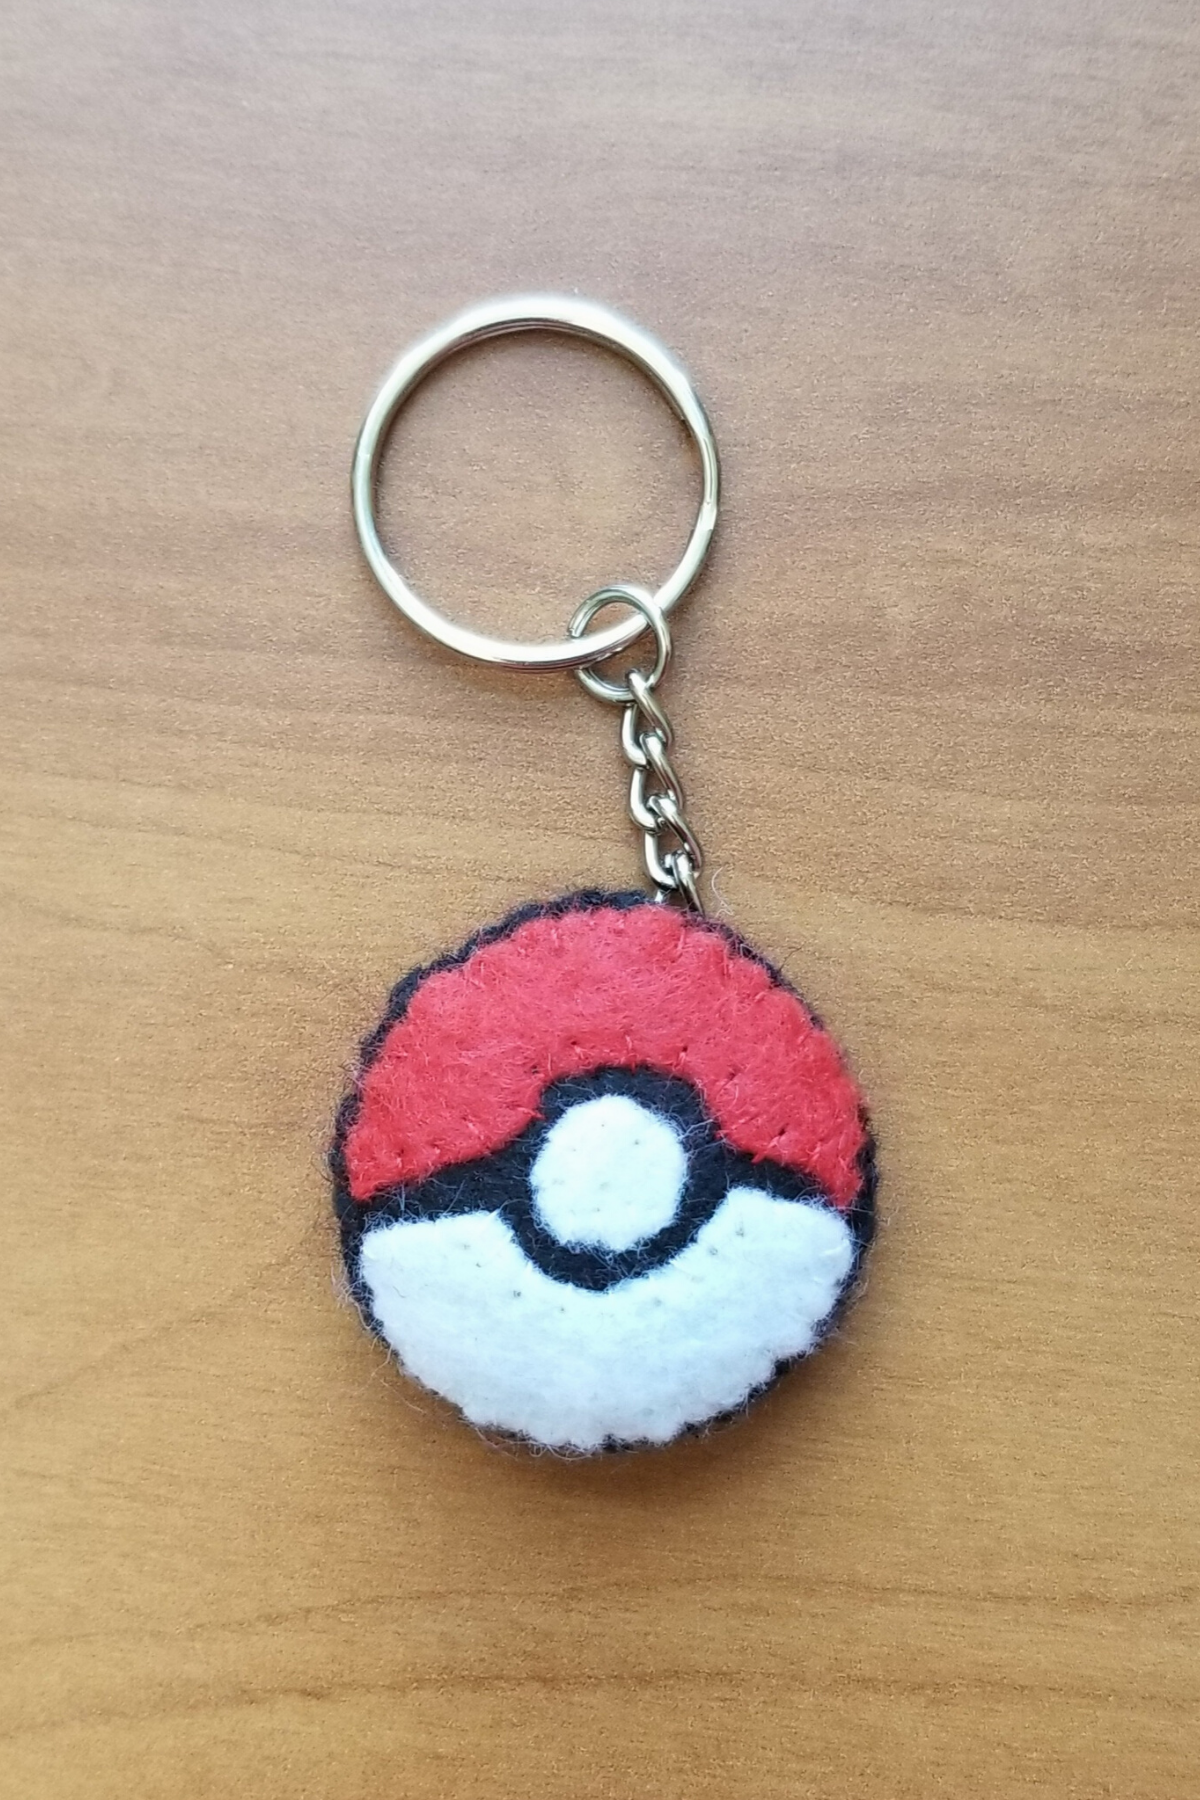 A keychain with a round disc of black, red, and white that is sewn together to look like a Pokeball from Pokemon